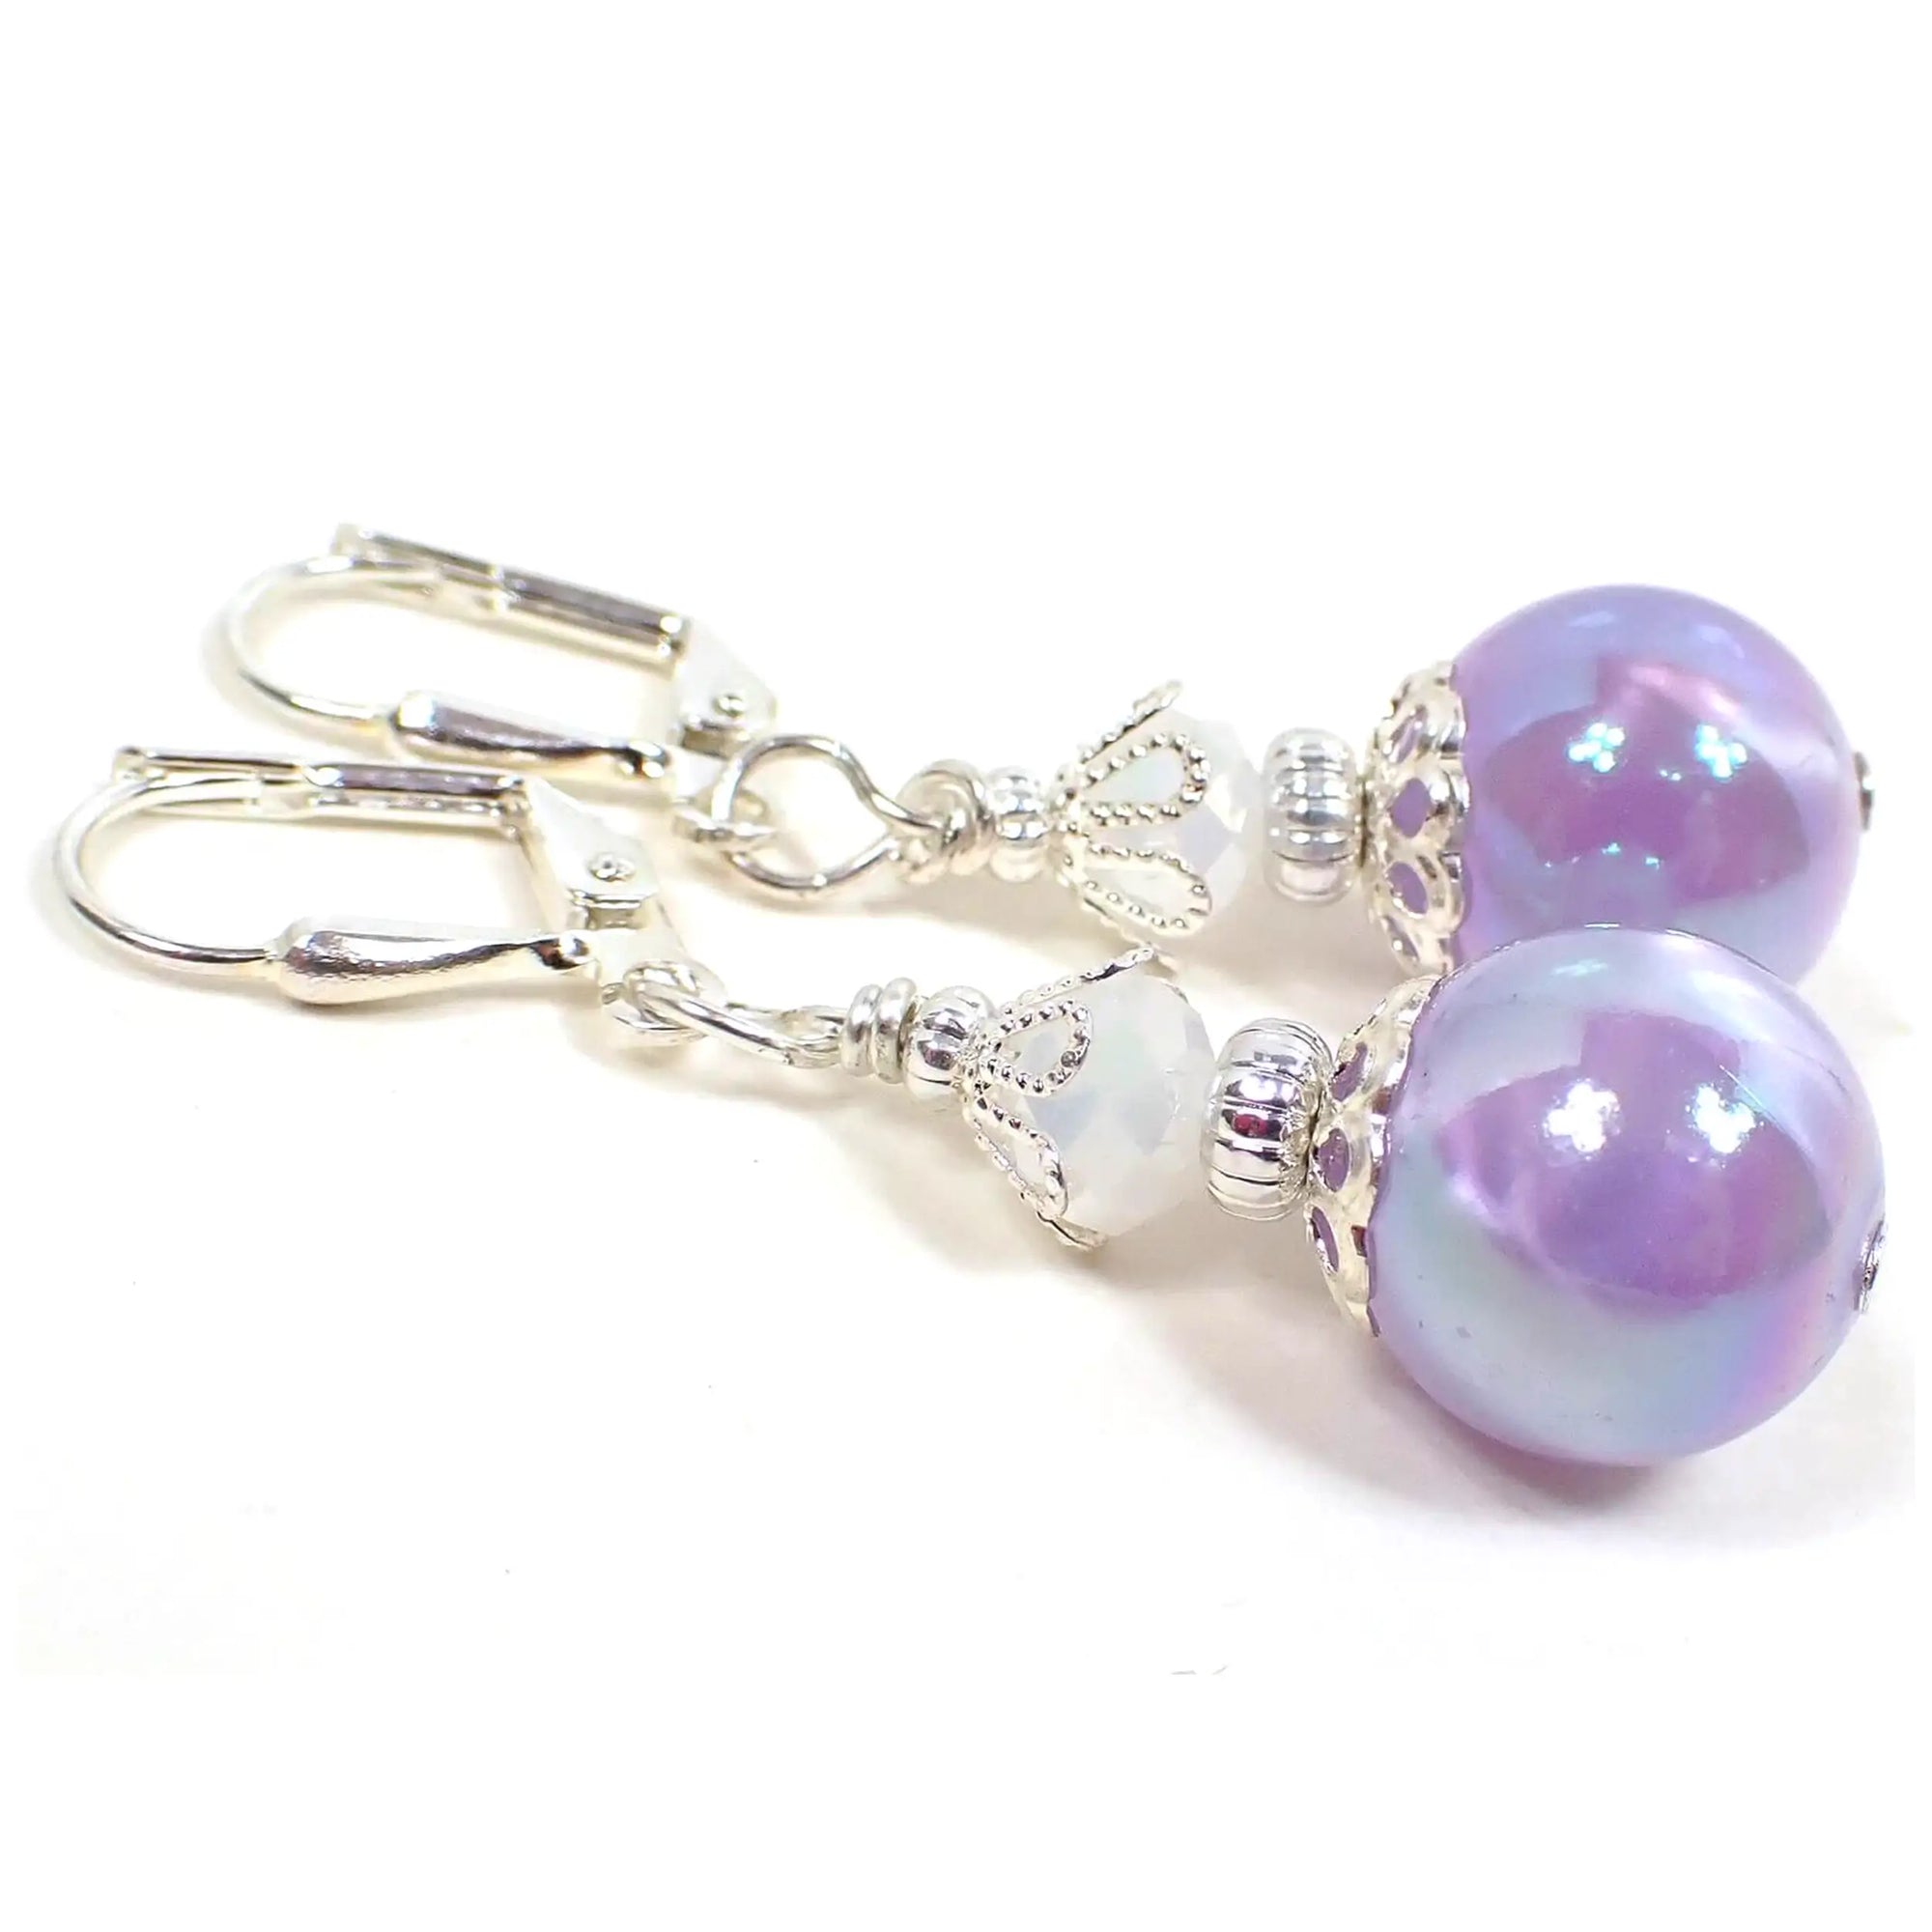 Angled side view of the handmade earrings with iridescent acrylic beads. The metal is silver plated in color. There are faceted white glass beads at the top and pearly iridescent purple acrylic beads at the bottom.